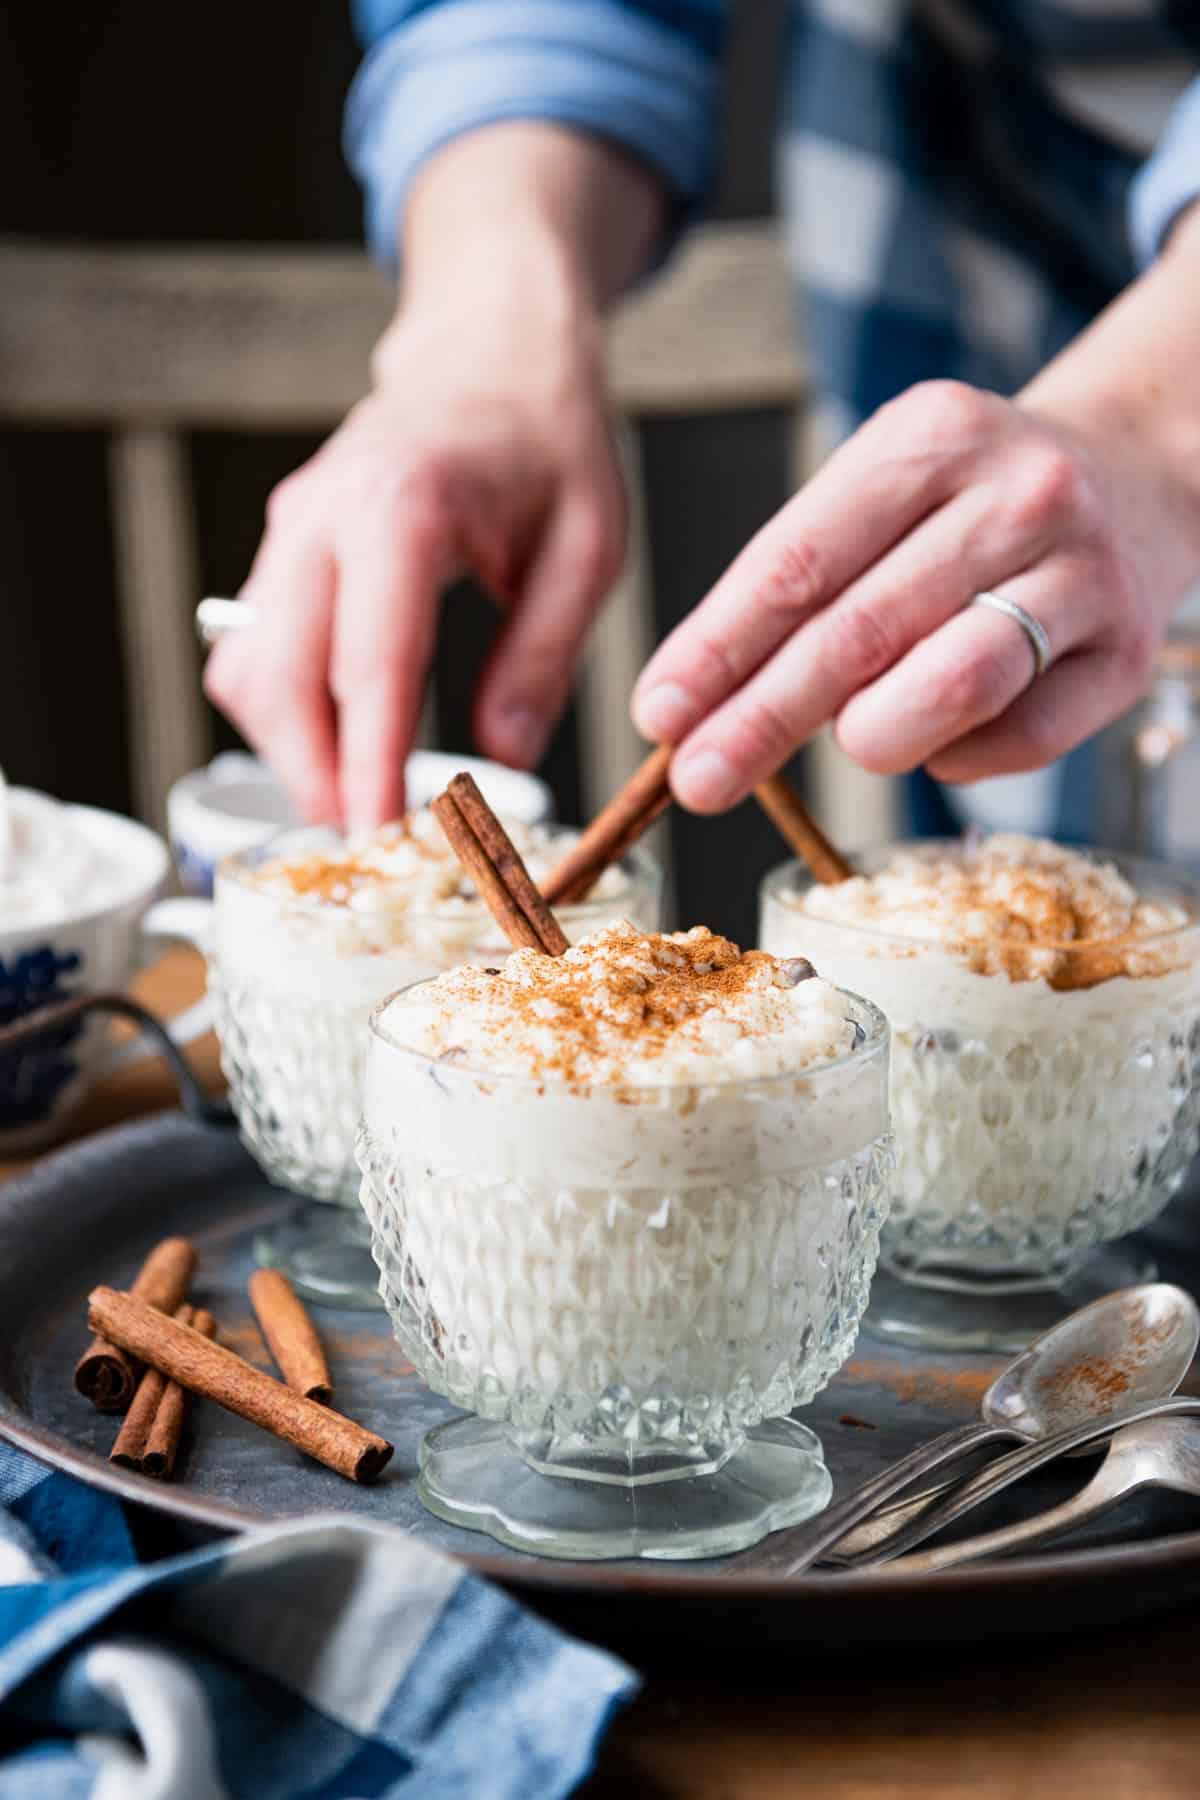 Hand serving rice pudding with cinnamon sticks.